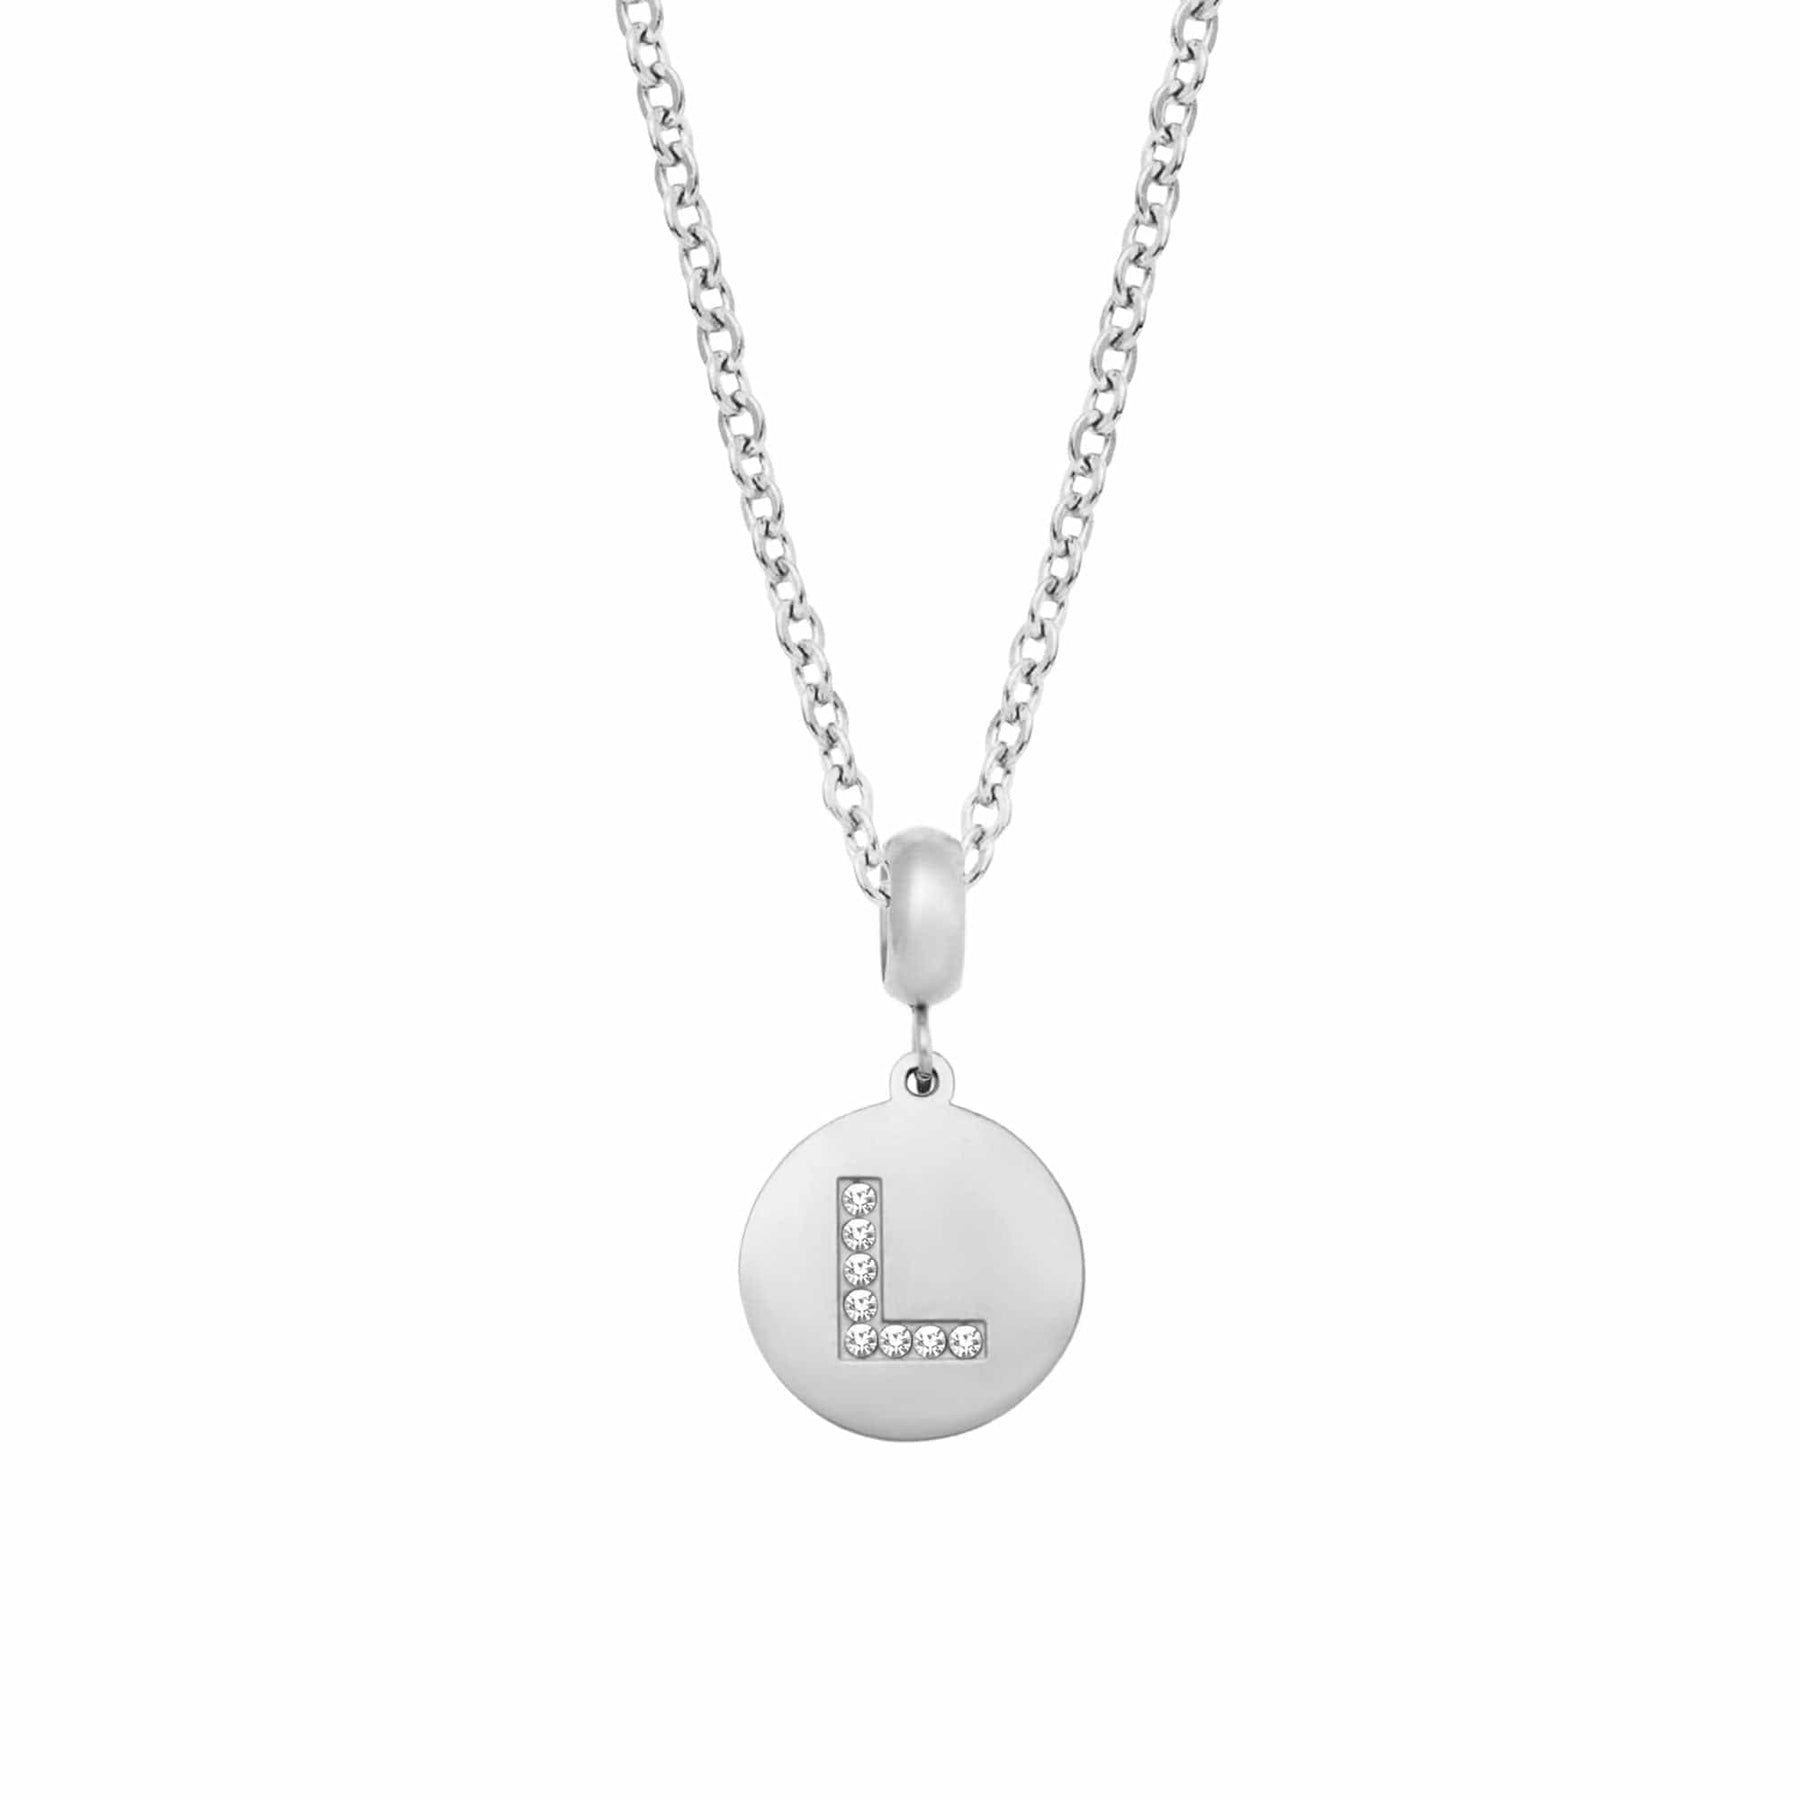 BohoMoon Stainless Steel CZ Initial Necklace Silver / A